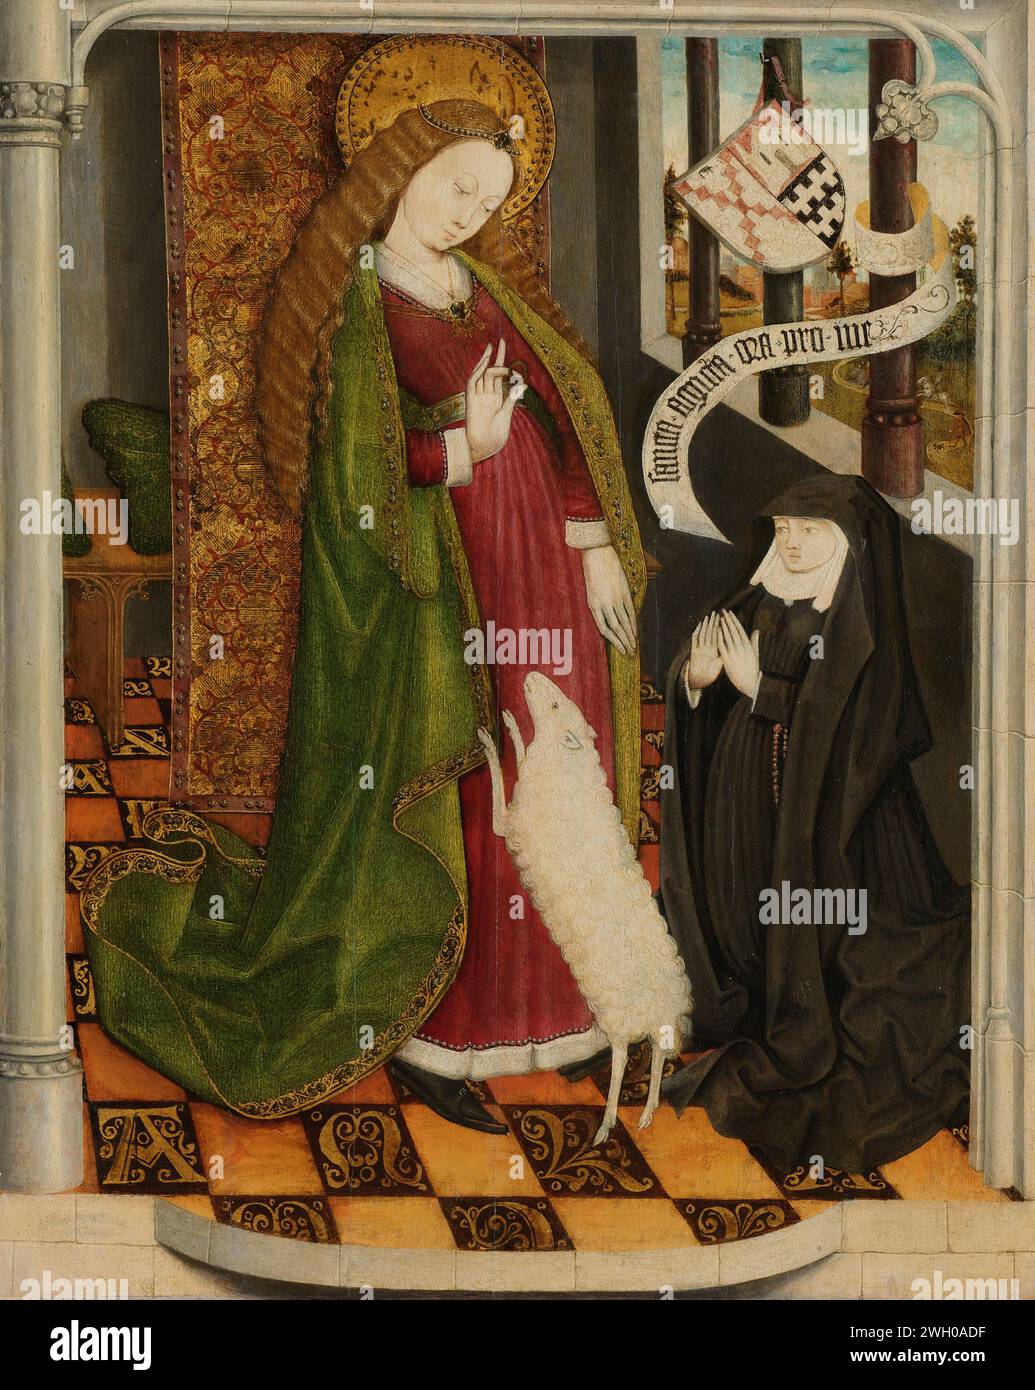 Geertruy Haeck Kneeling in Prayer before Saint Agnes, anonymous, c. 1465 painting The founder Geertruy Haeck-van Slingelandt van der Tempel (ca. 1425-1467) kneeling in prayer for the holy Agnes with a lamb. At the top right in front of the window a banderole with text and the family crest. Northern Netherlands panel. oil paint (paint)  the virgin martyr Agnes of Rome; possible attributes: lamb, ring - specific aspects ~ female saint. historical persons - BB - woman Stock Photo